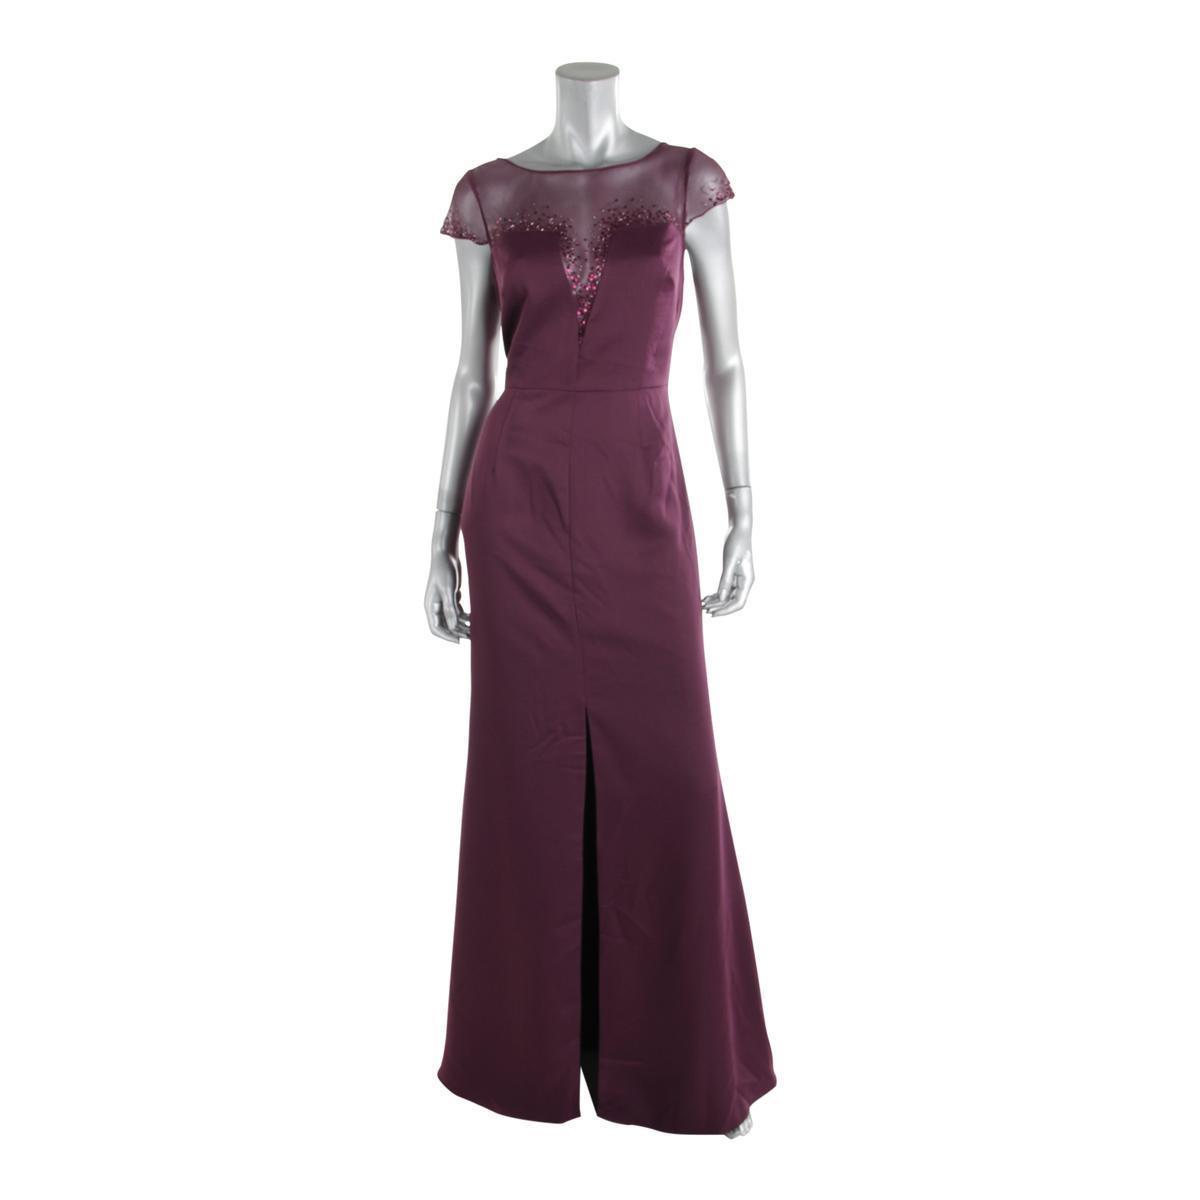 Adrianna Papell New Womens Purple Embellished Evening Dress Gown 10 - $188.10